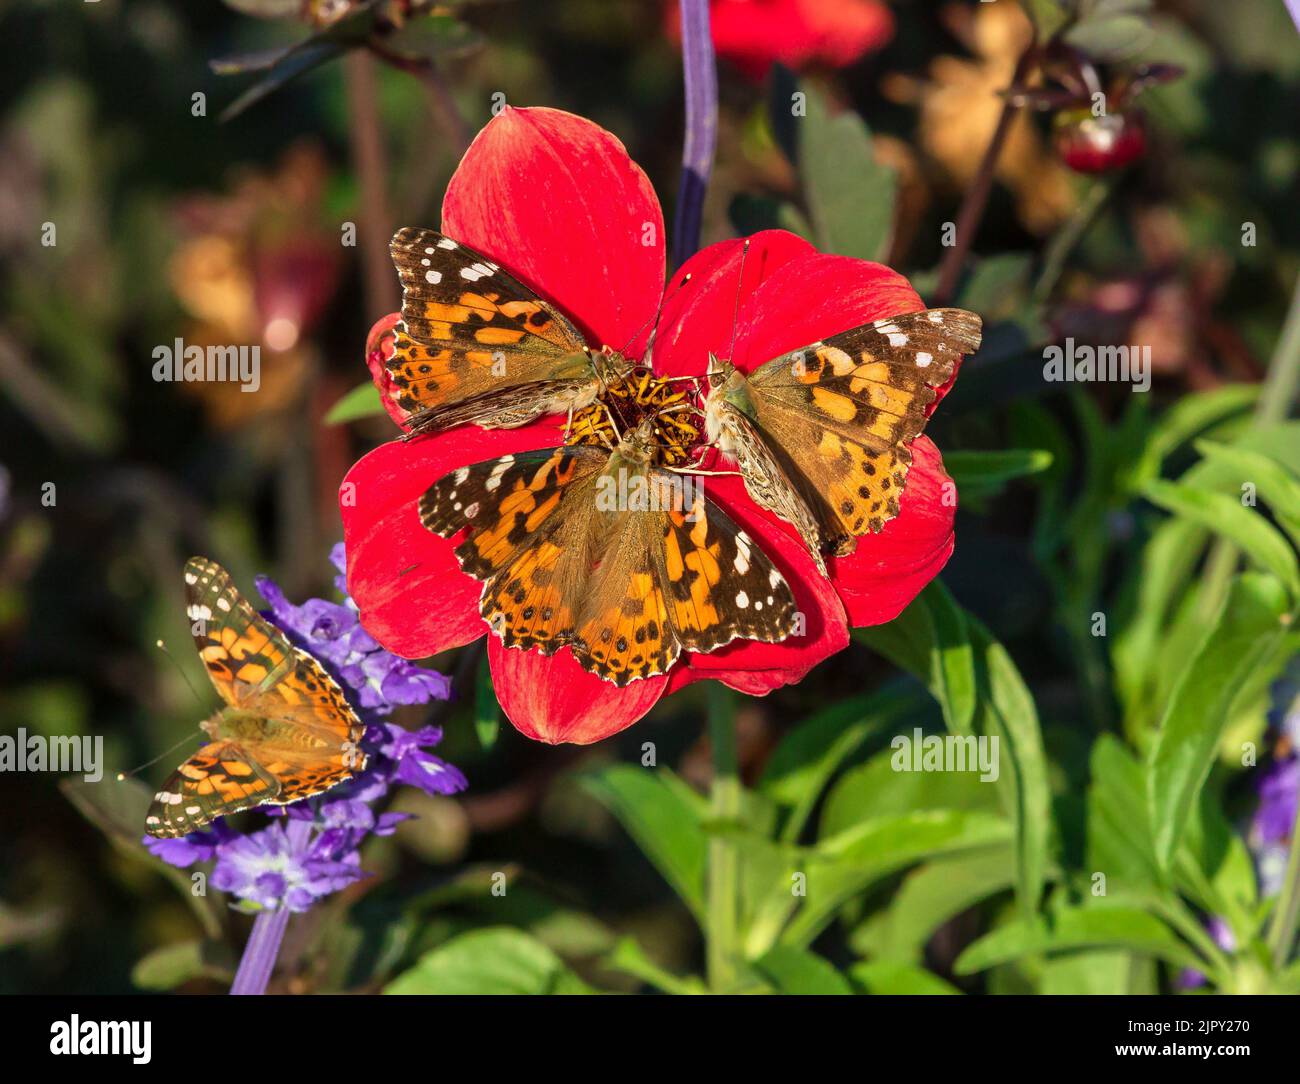 Three Painted Lady Butterflies together pollinating a Red Dahlia flower during a mass migration event in Colorado. Stock Photo